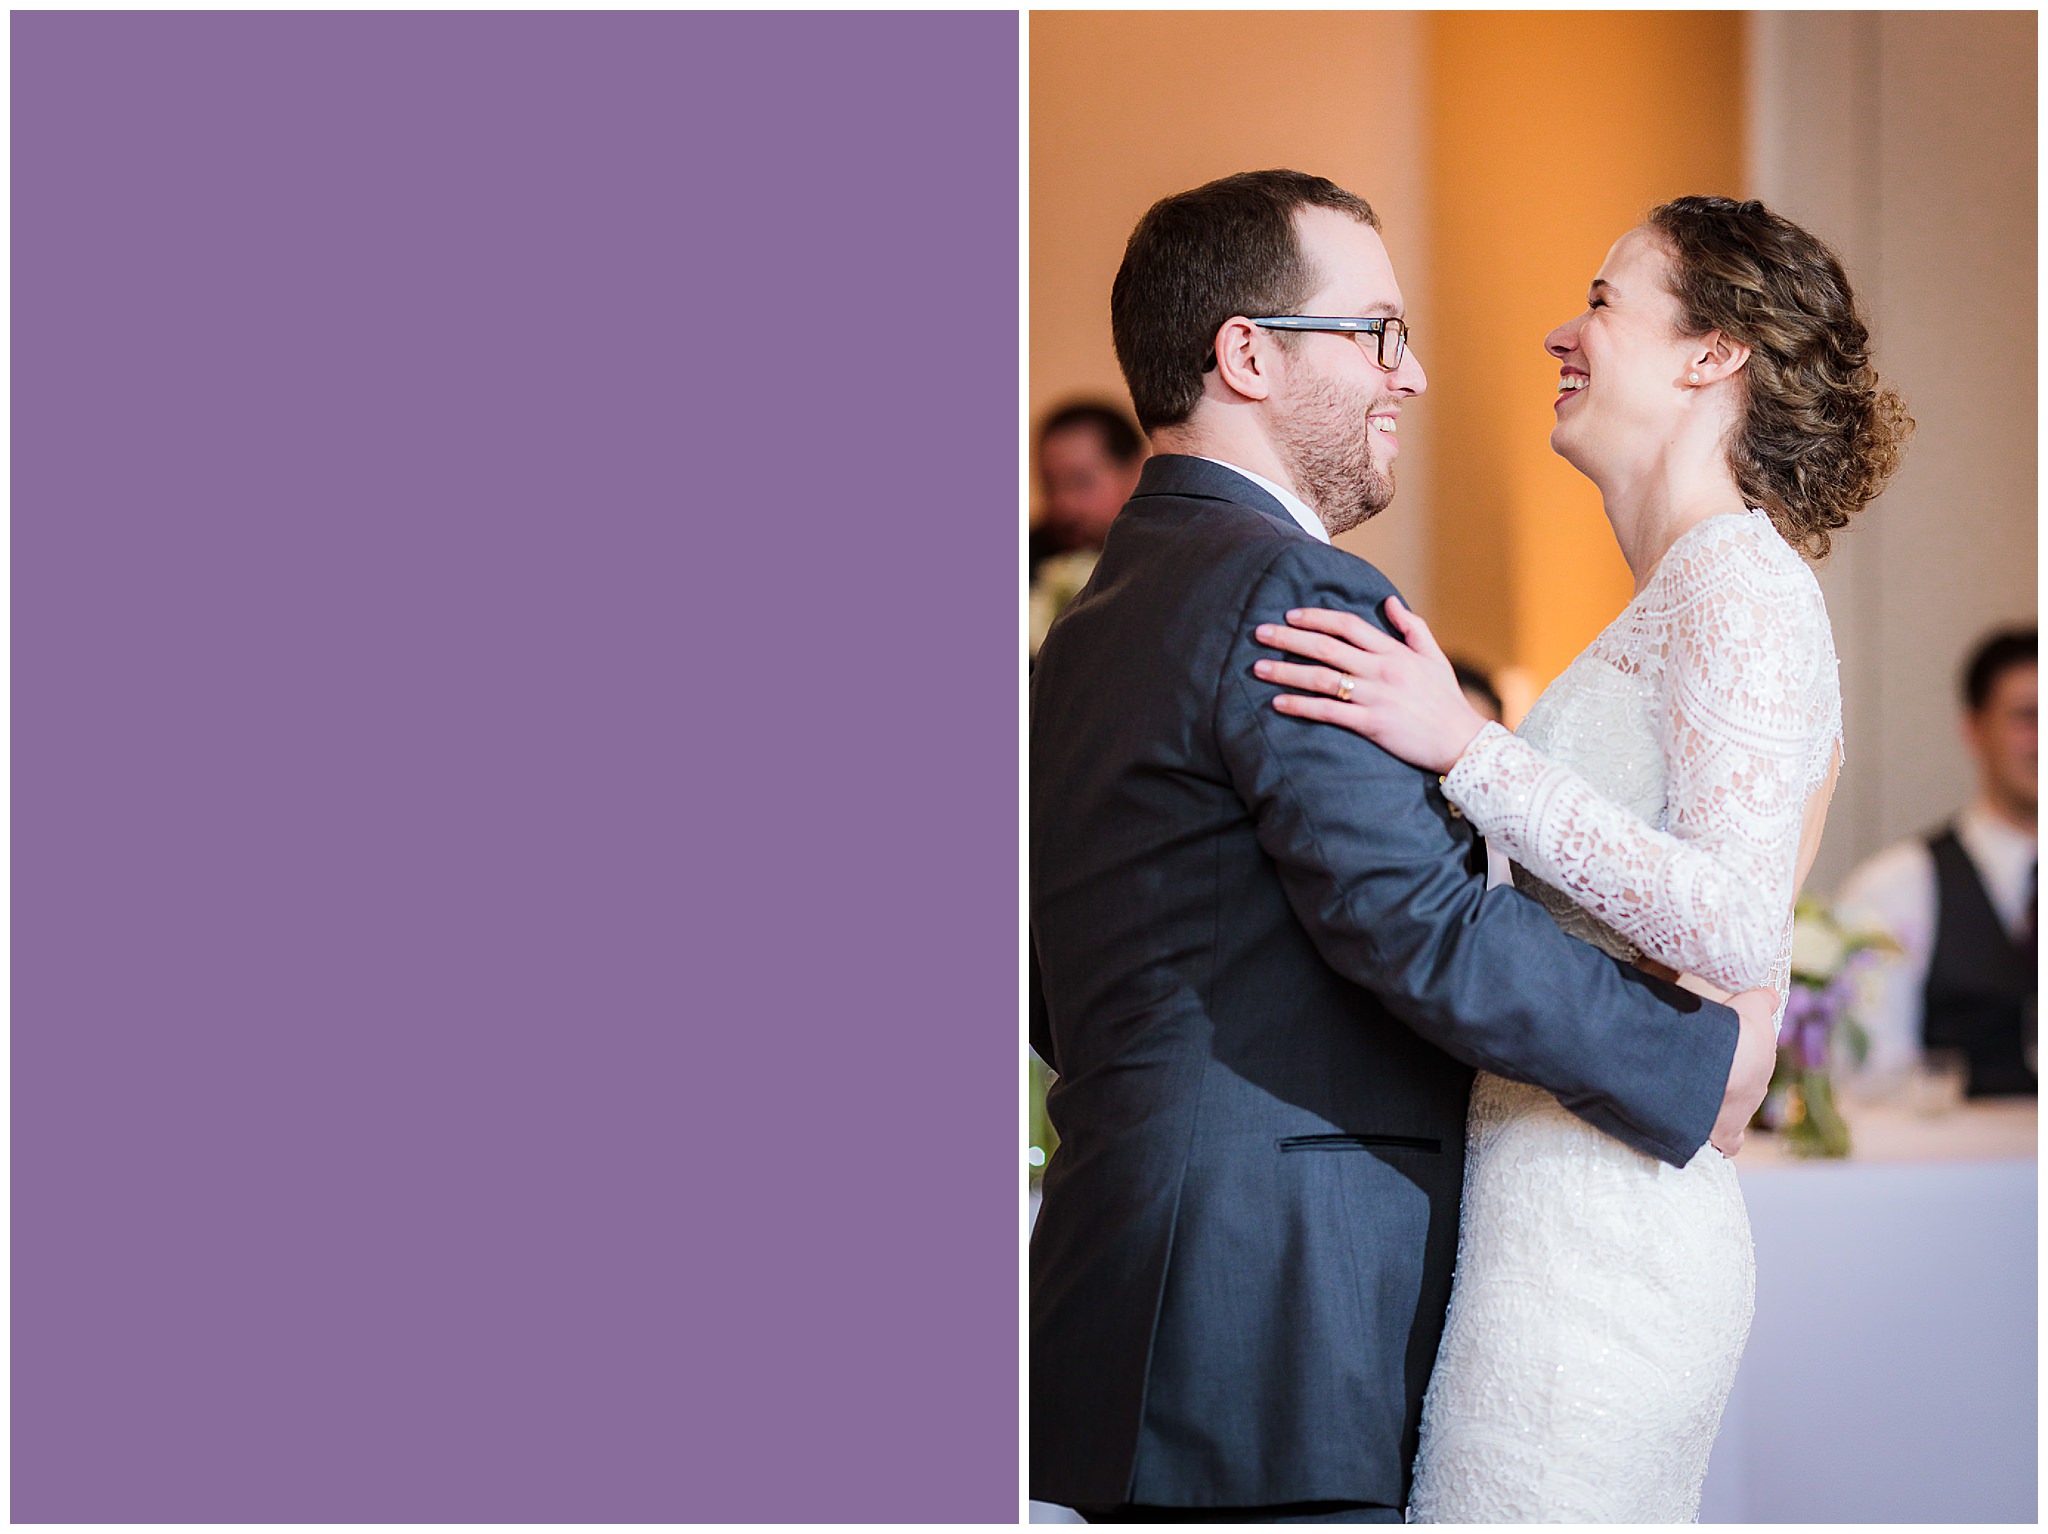 Bride & groom share their first dance at the DoubleTree Pittsburgh Downtown